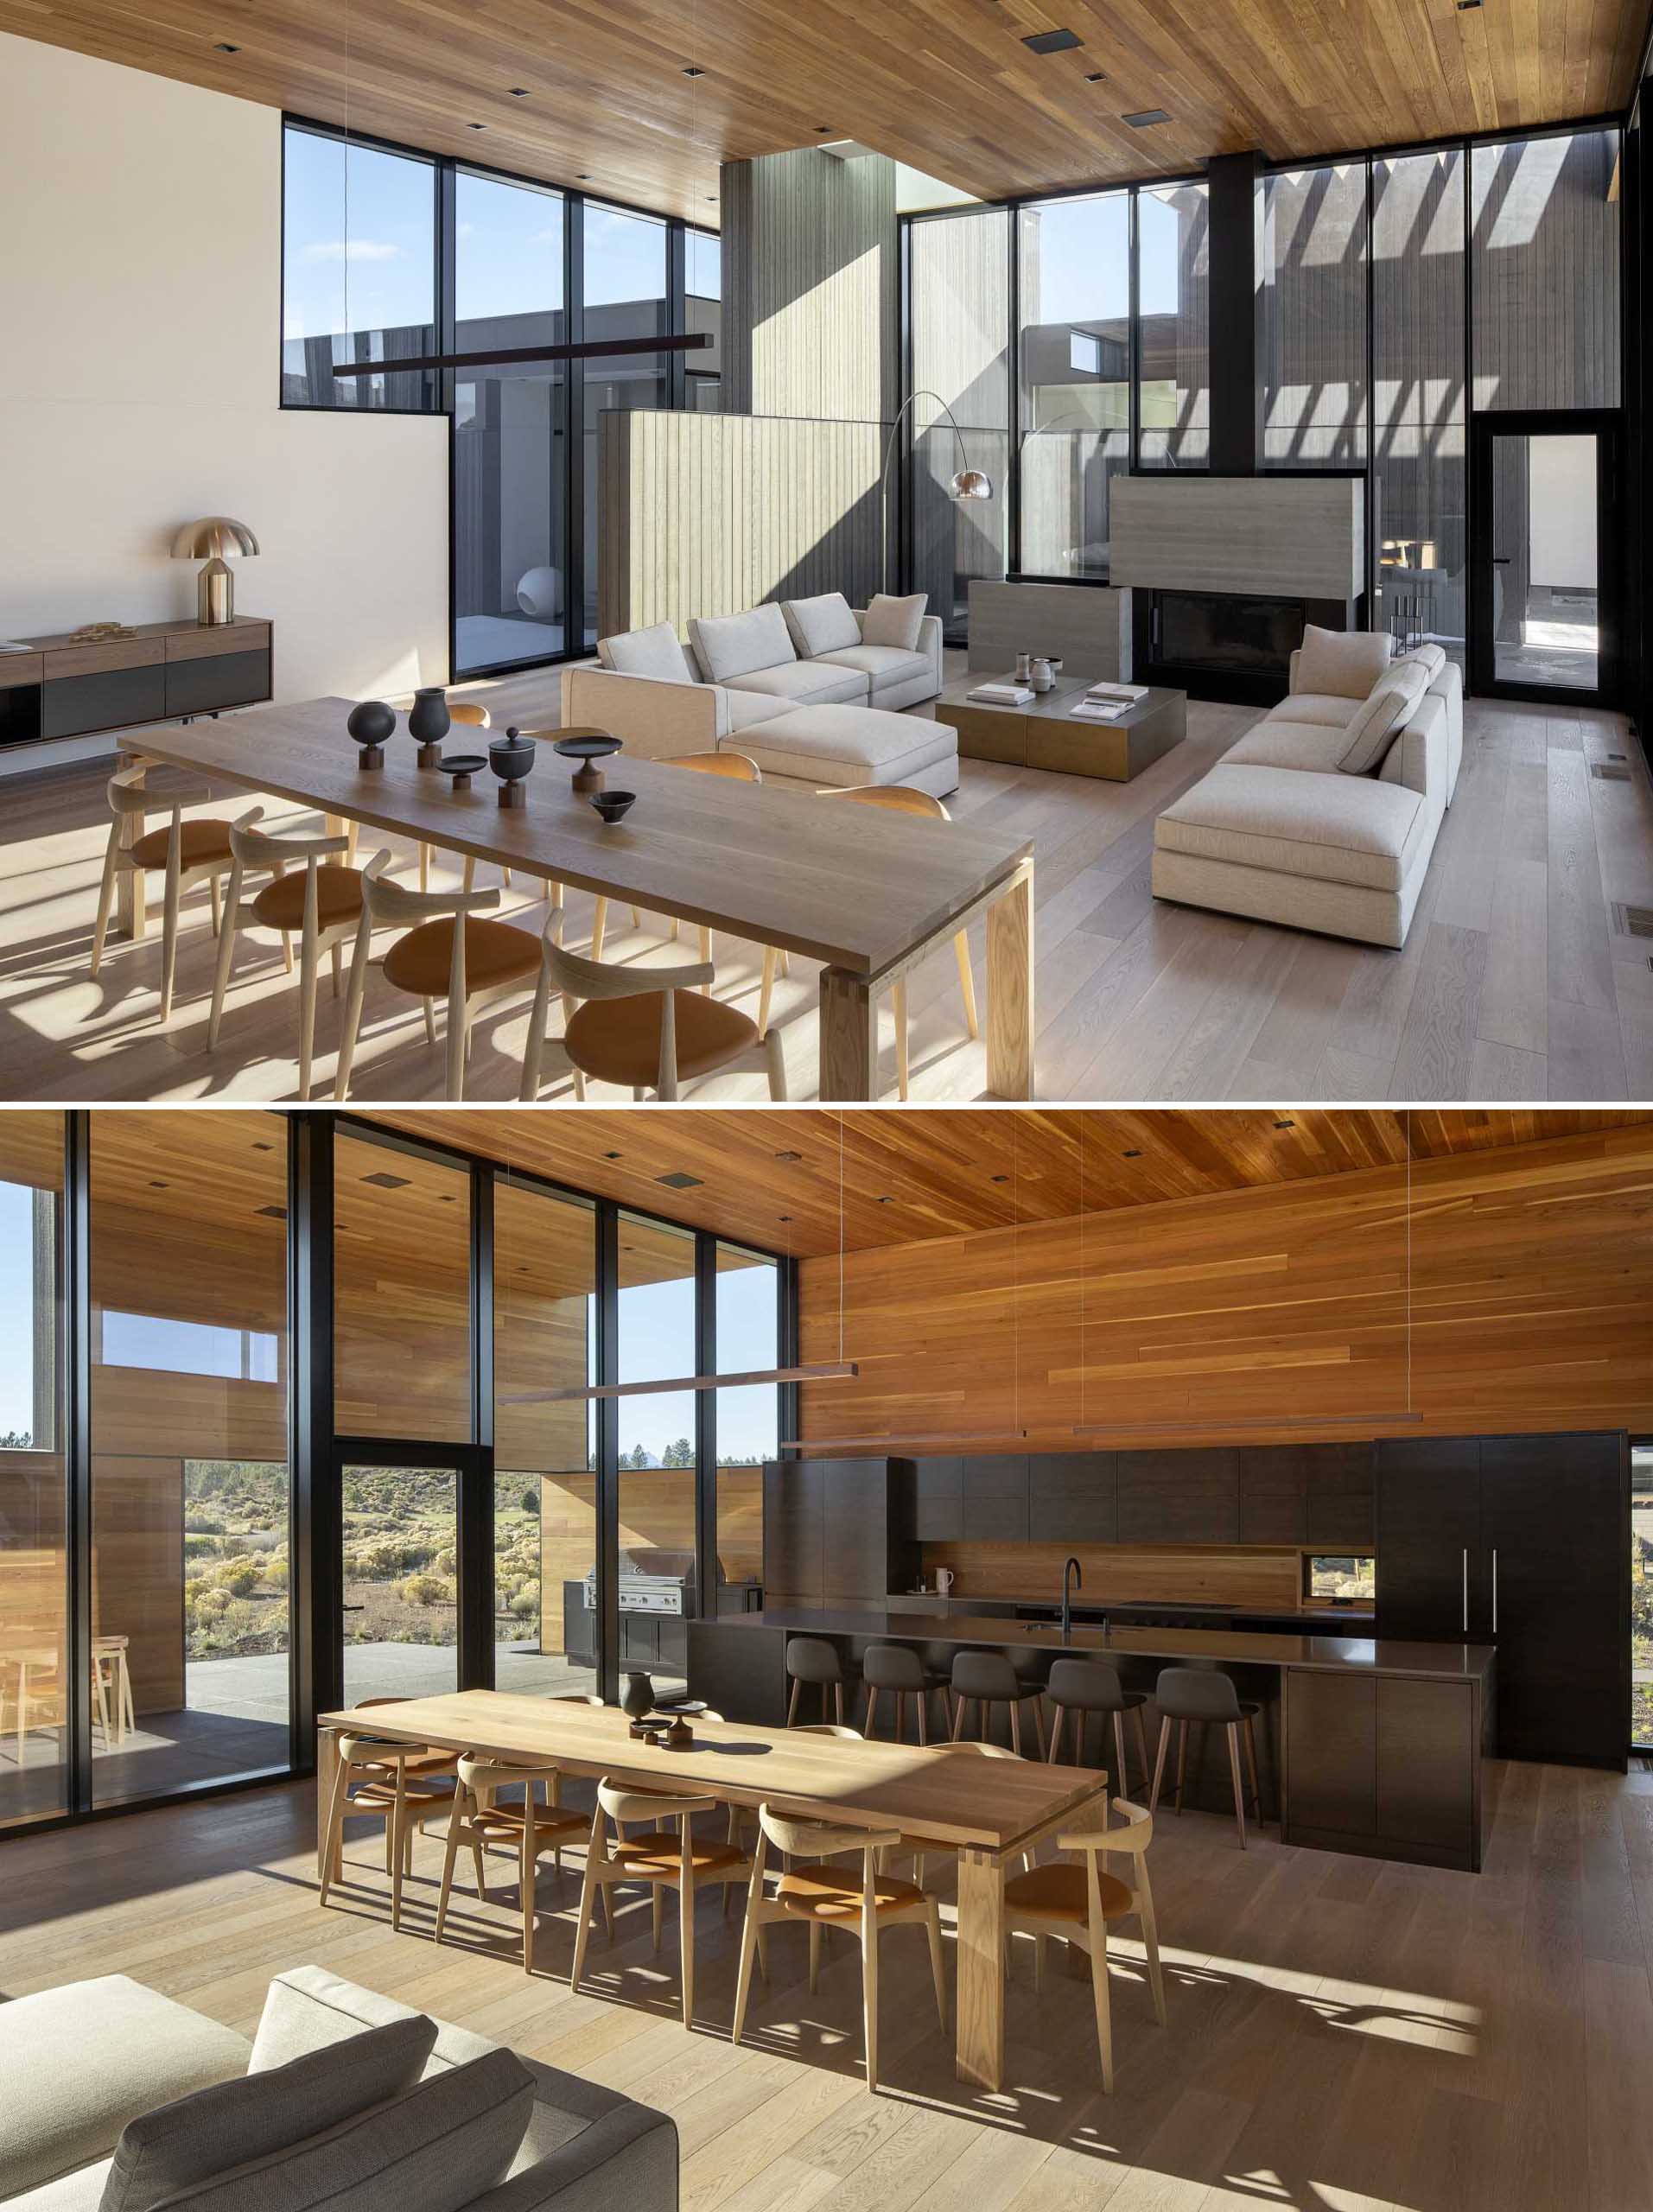 In this modern house with high ceilings, there are tall windows are featured on multiple walls, while the living room includes a wood burning fireplace.